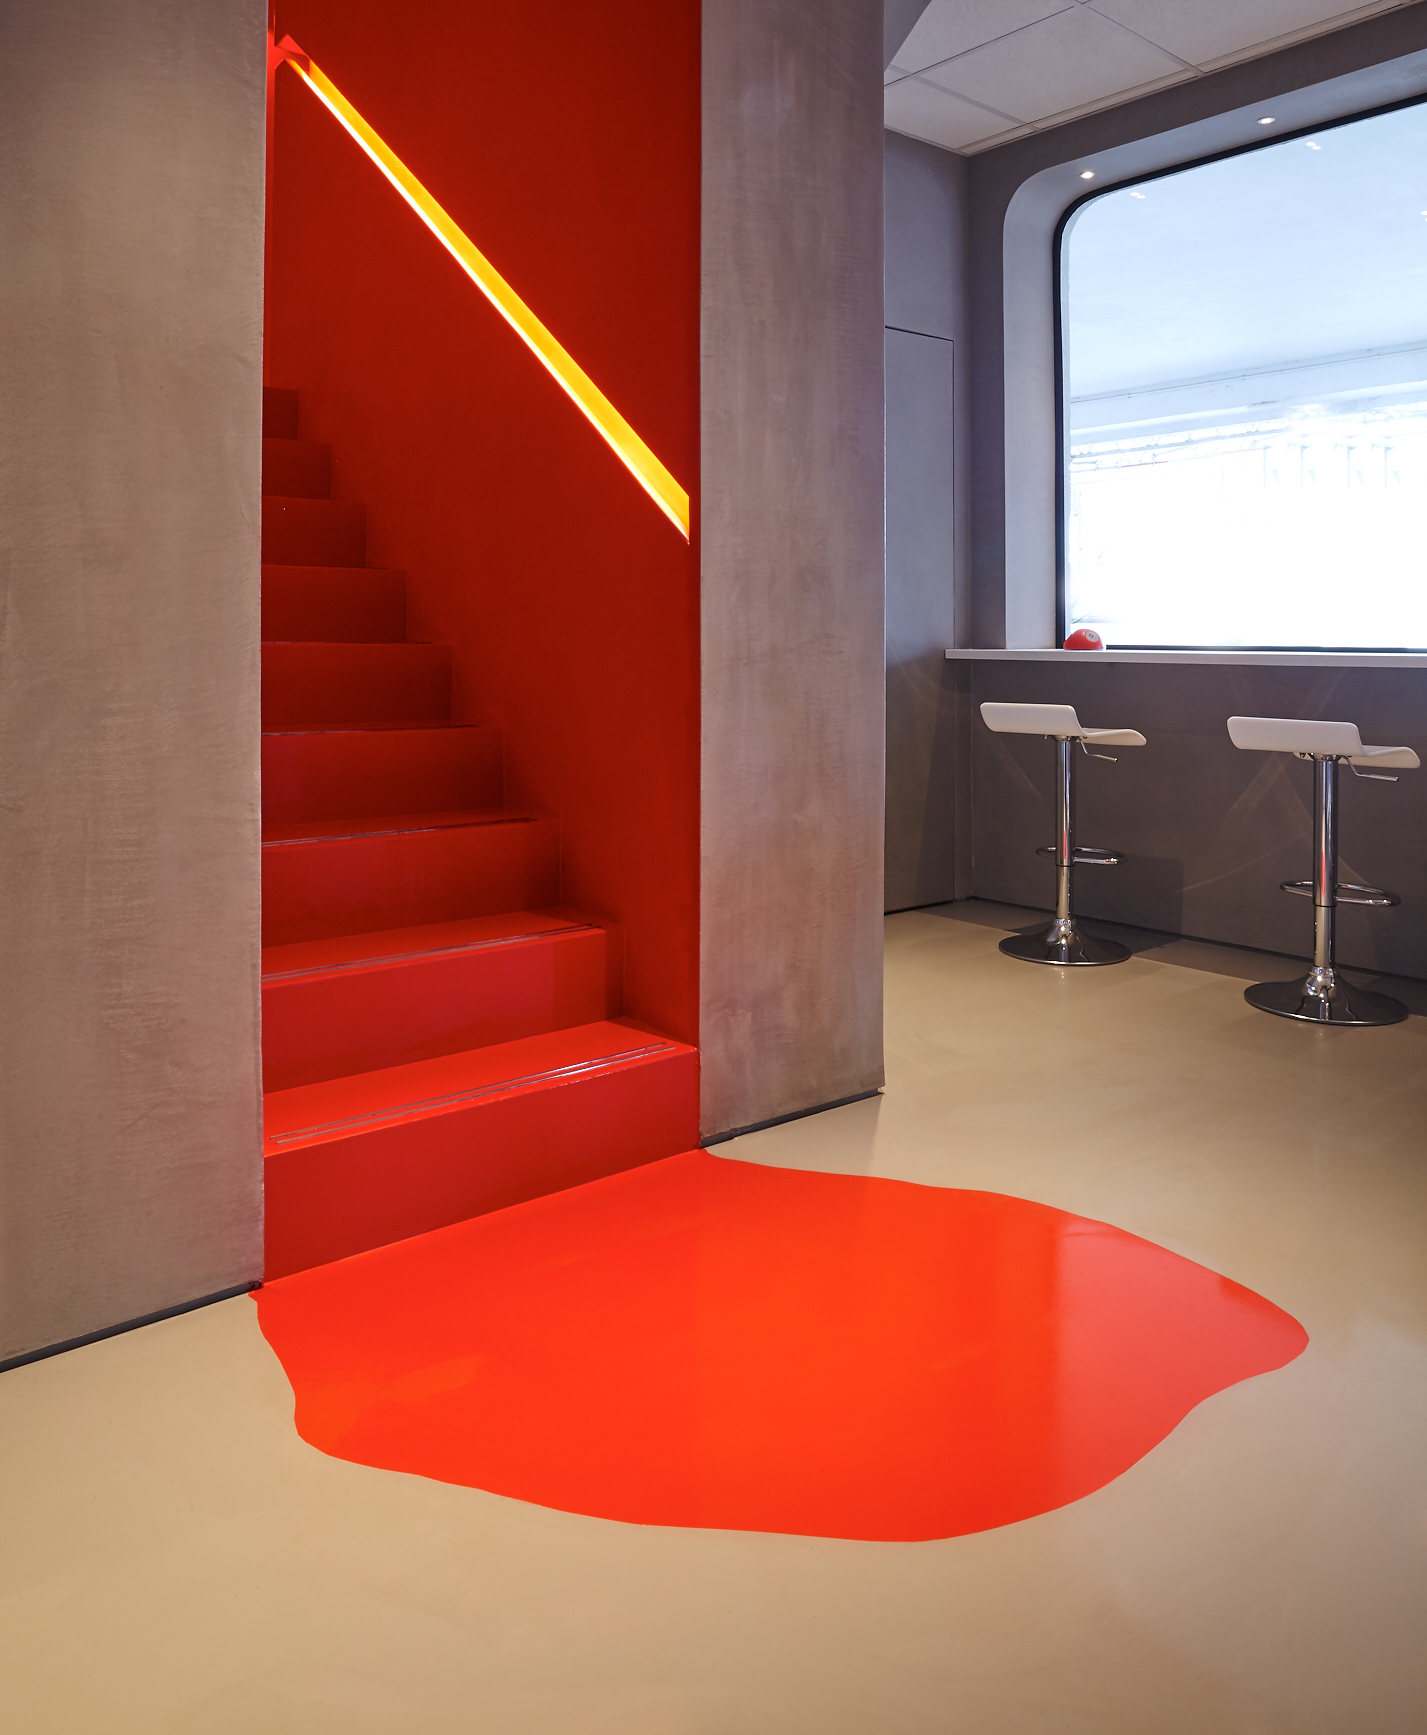 A ToughSphere resin floor in grey and red